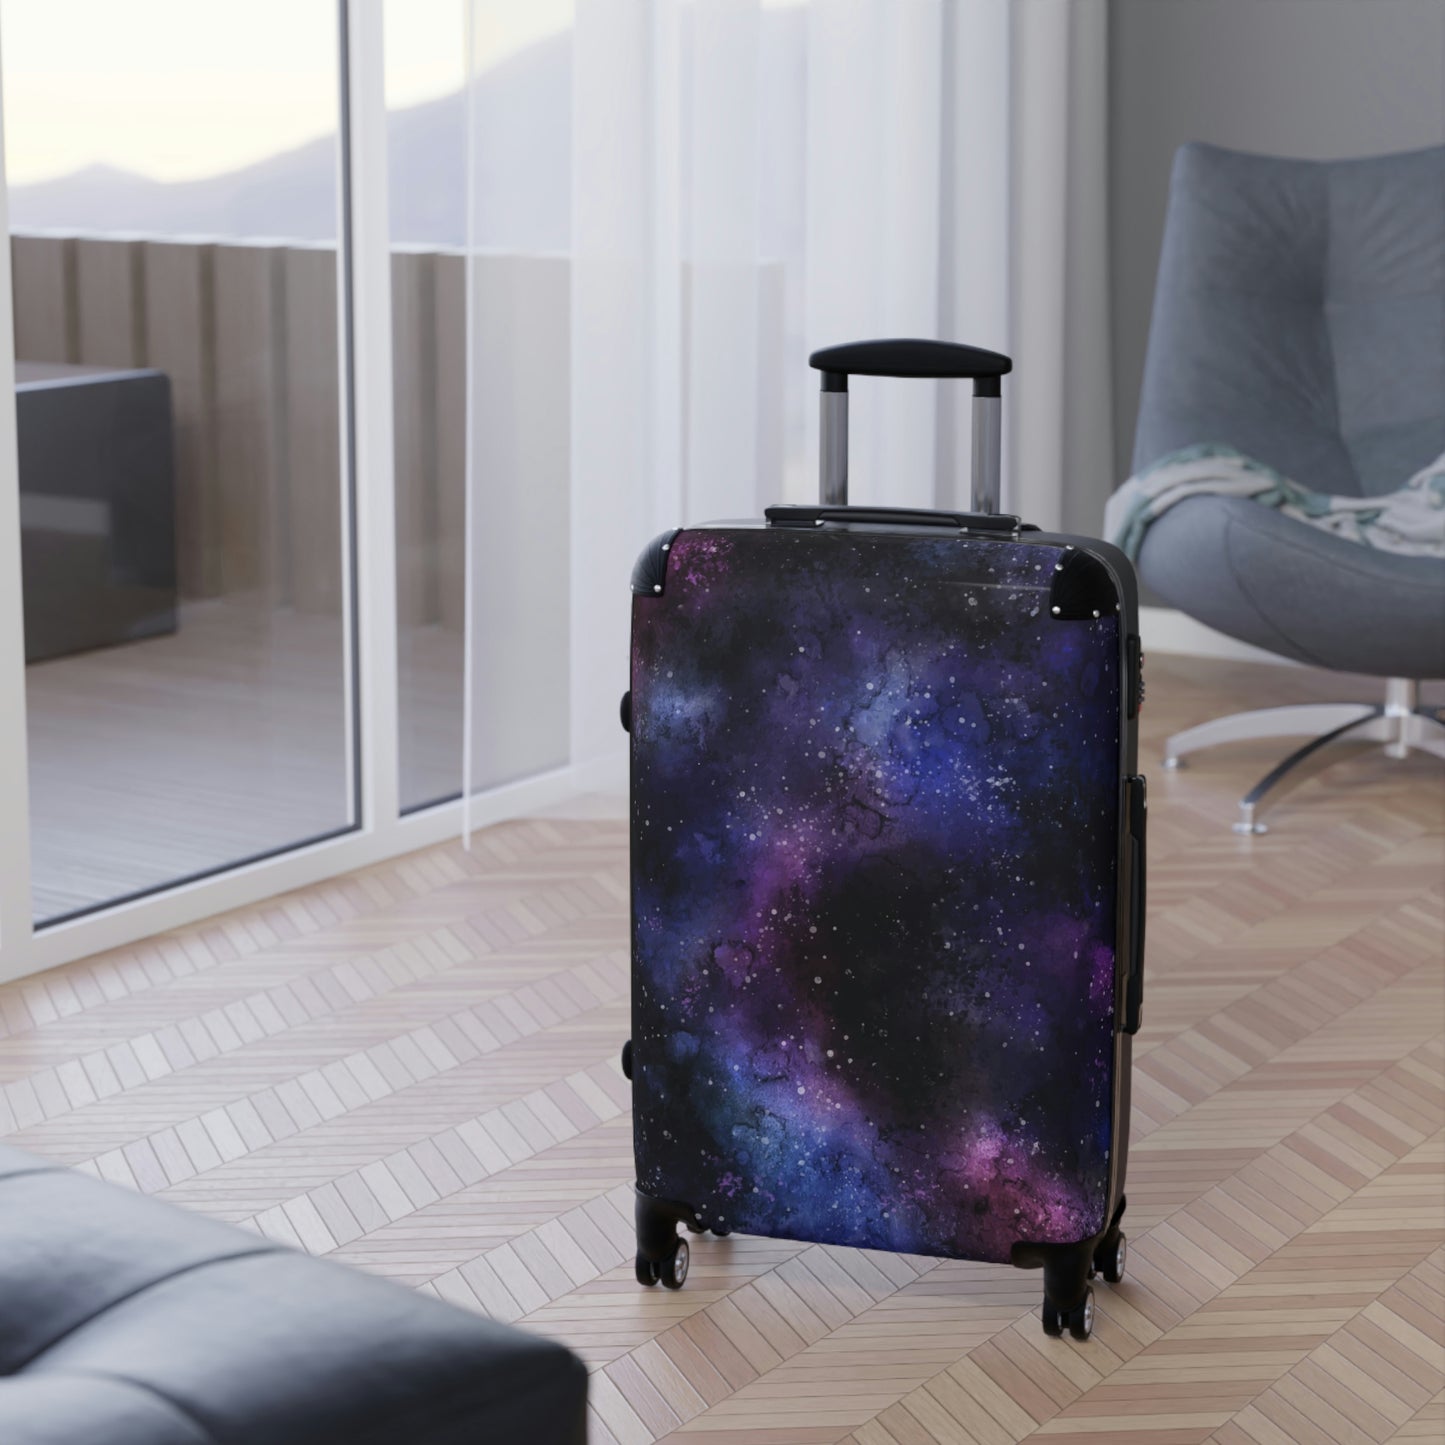 Galaxy Cabin Suitcase Luggage, Space Stars Purple Universe Carry On Travel Bag Rolling Spinner with Lock Designer Hard Shell Wheels Case